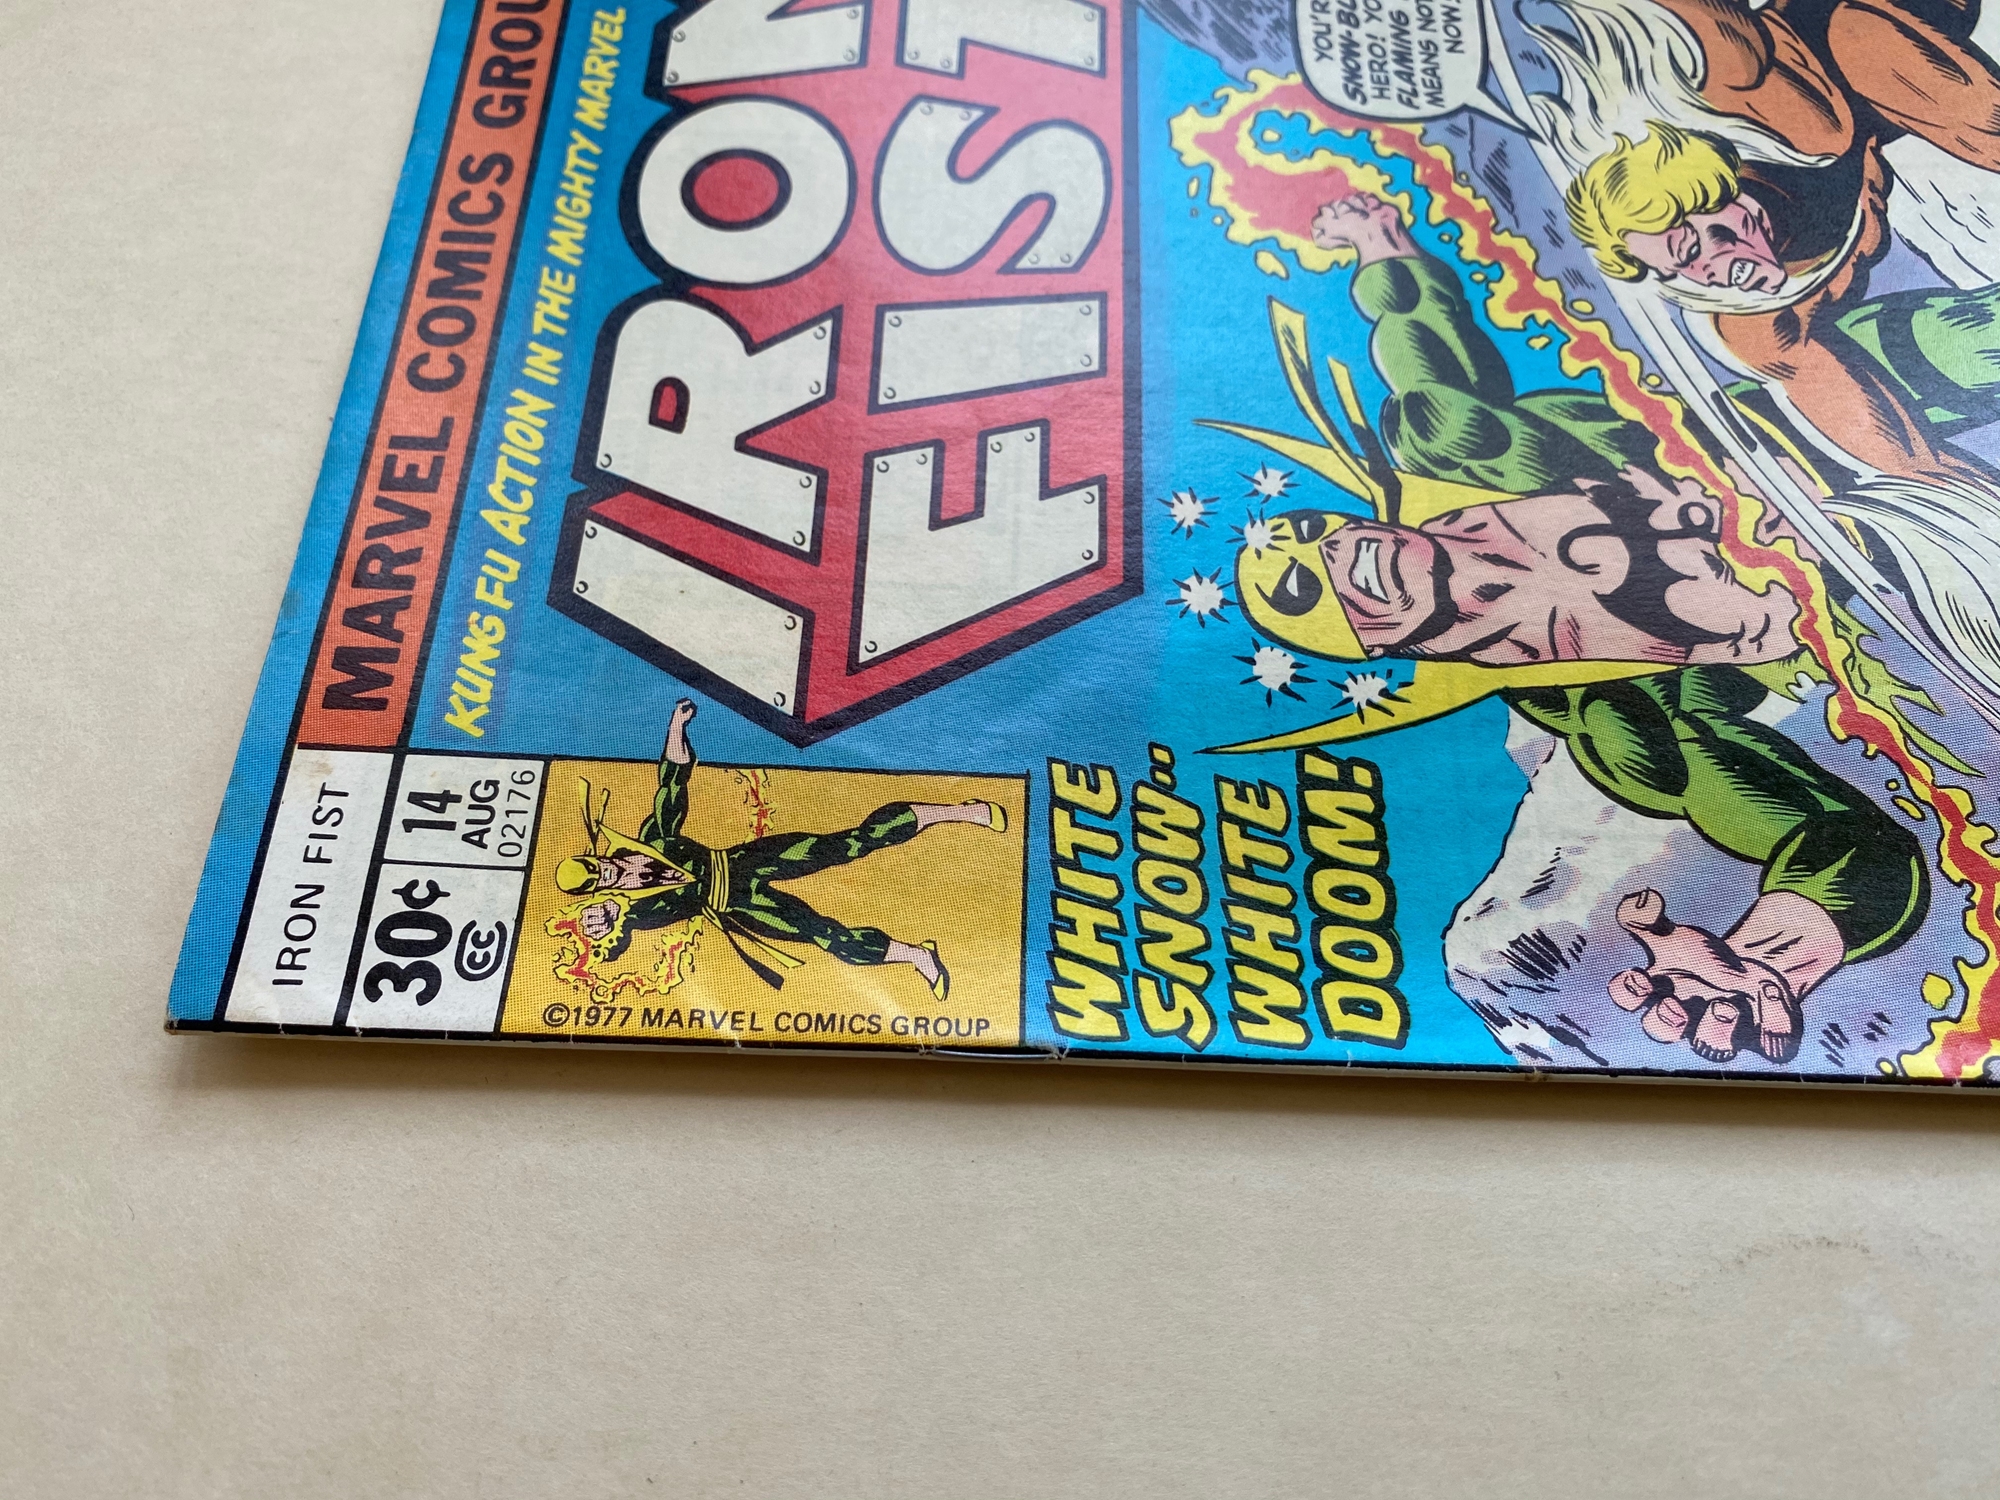 IRON FIST #14 - (1976 - MARVEL - CENTS Copy) - First appearance of Sabretooth - Al Milgrom cover - Image 3 of 9